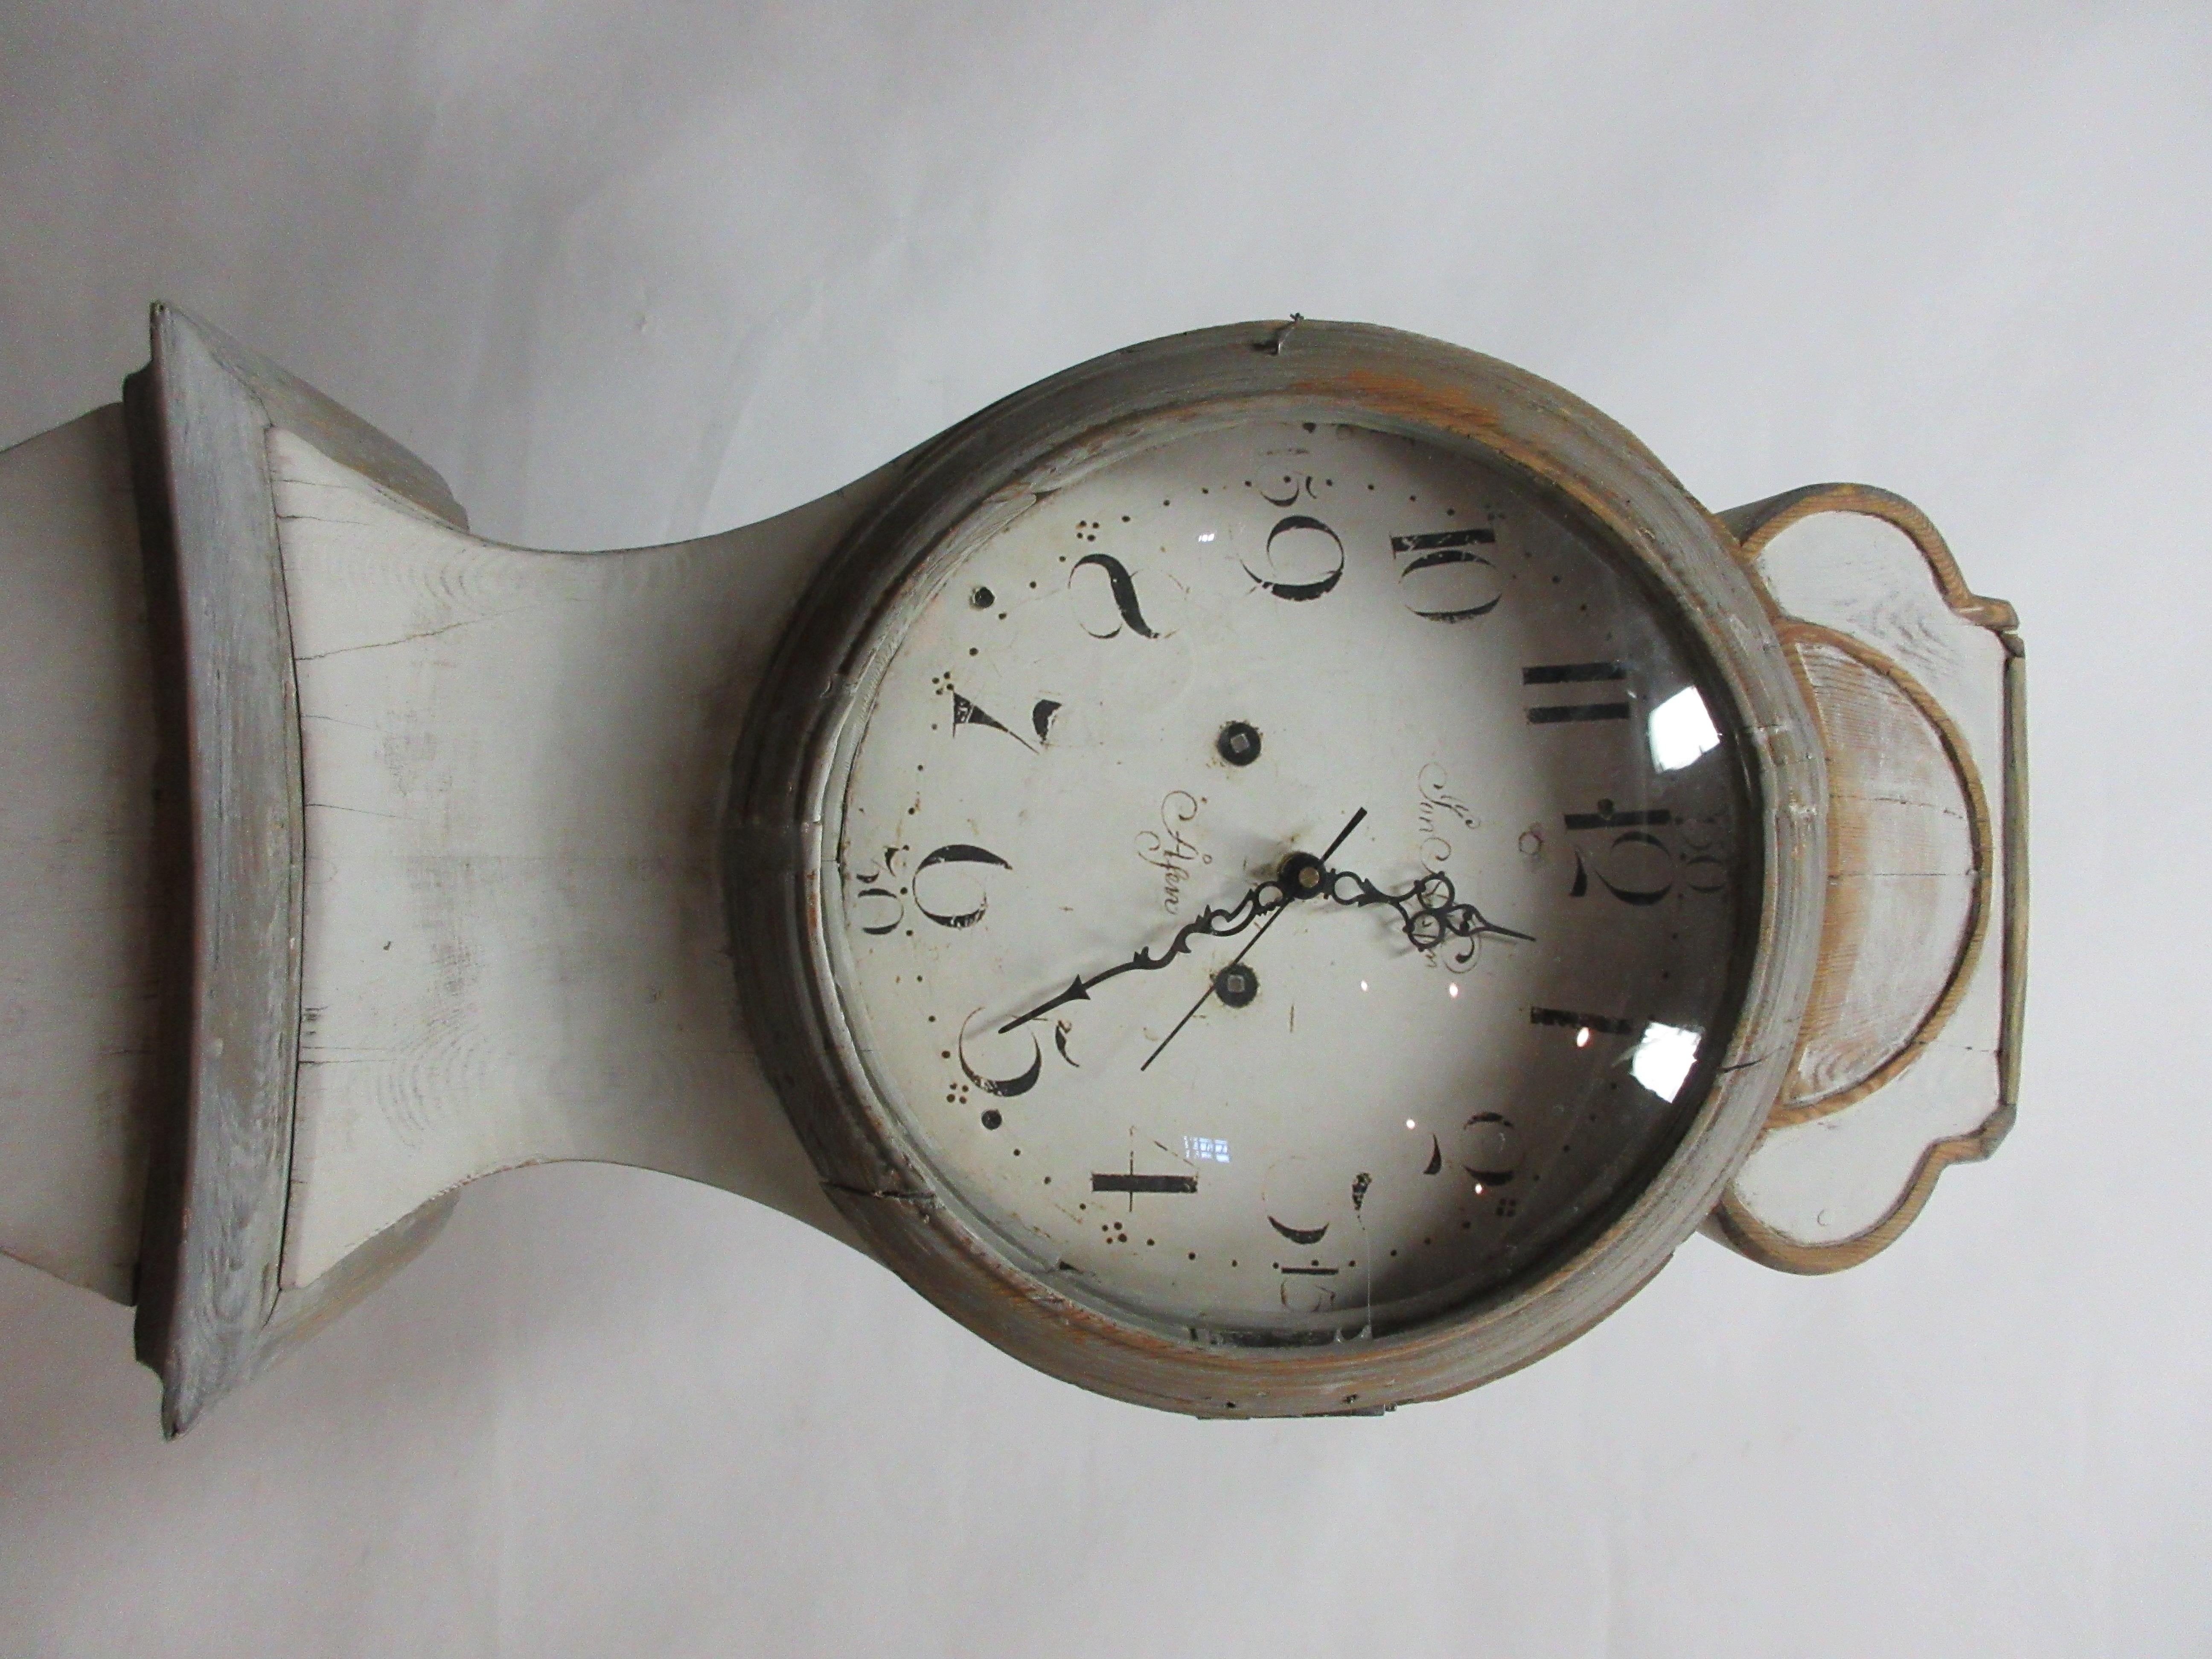 This is a Swedish Mora clock, the style is called a 